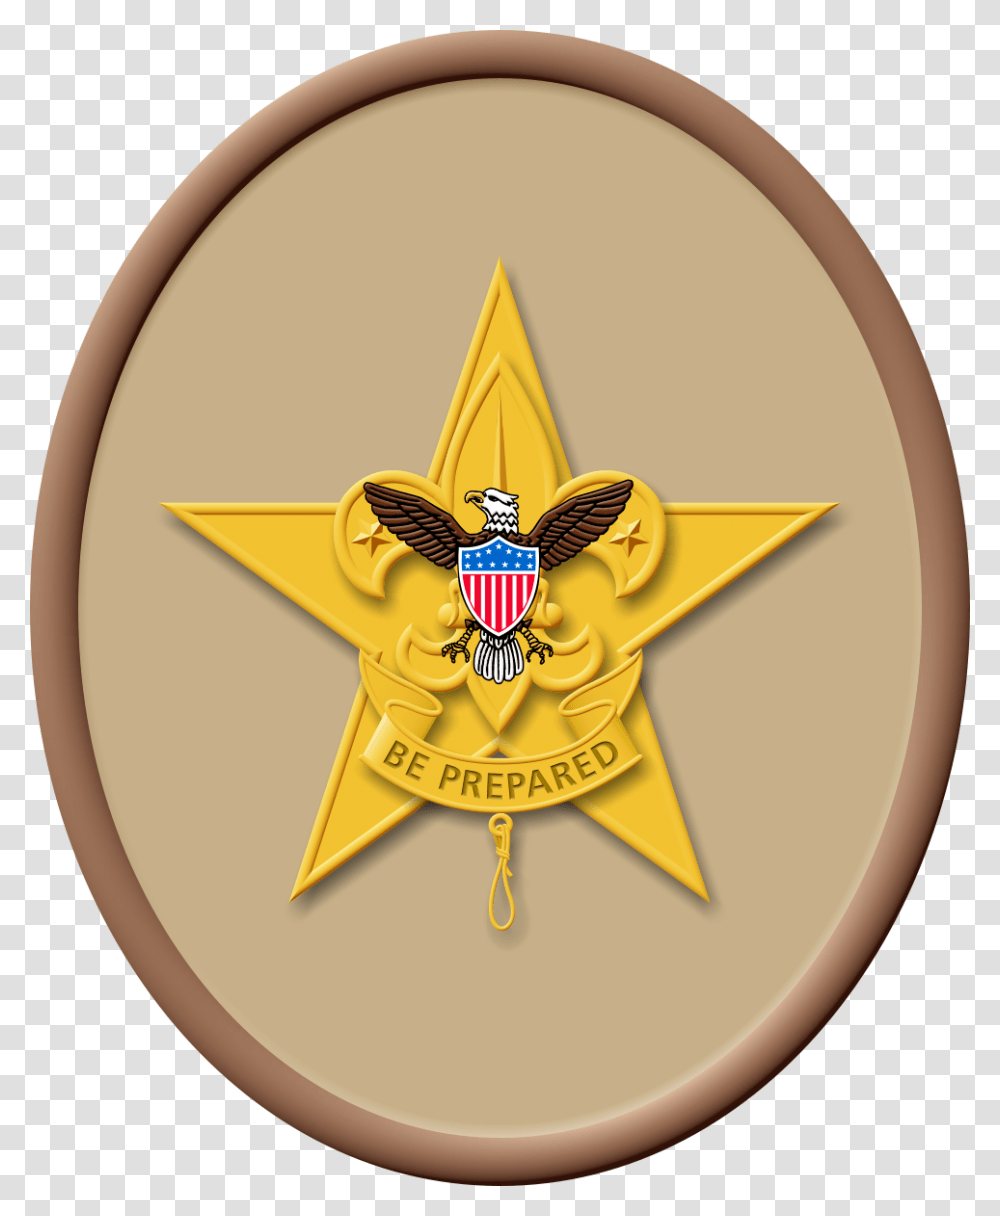 Star Is The Rank Above First Class And Below Life Scout Boy Scouts Of America, Logo, Trademark, Badge Transparent Png